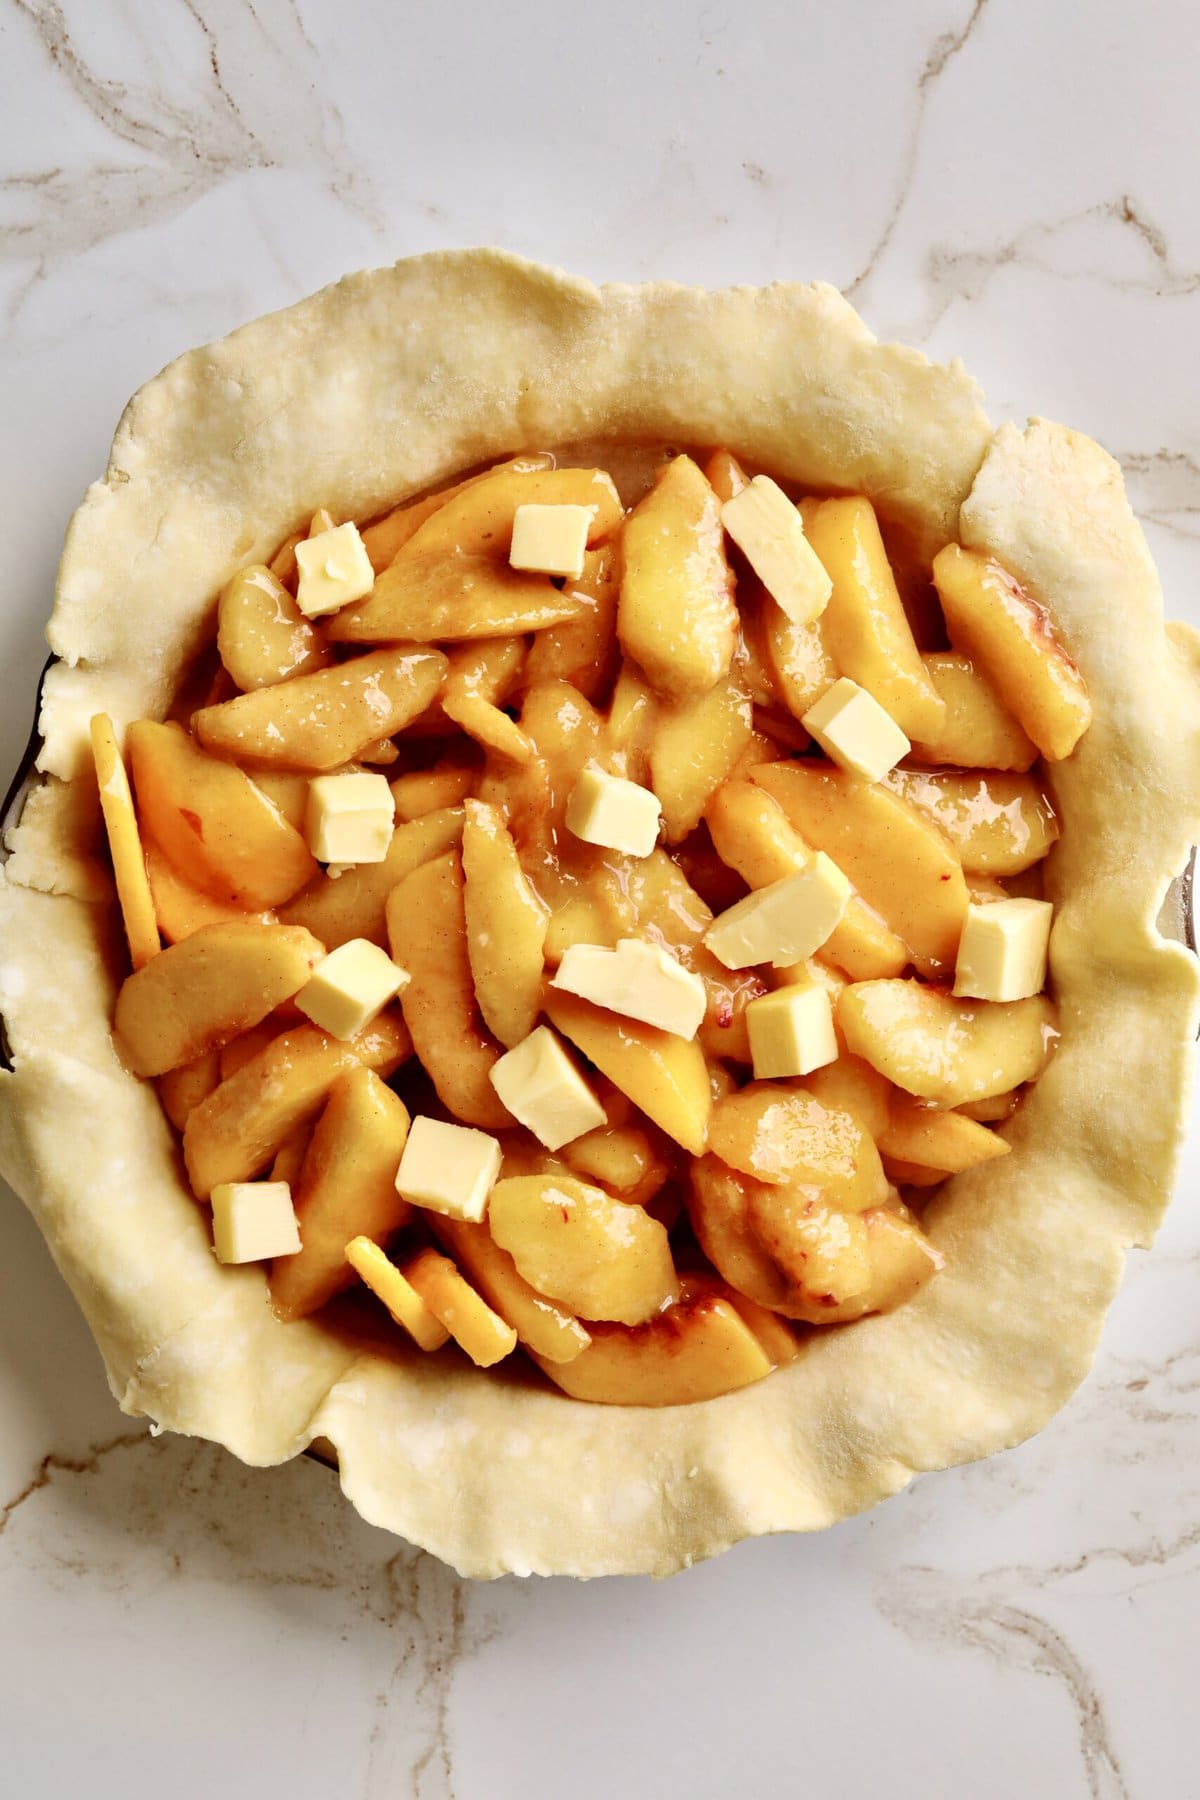 How to make fresh peach pie recipe step-by-step: adding prepared filling and dotting with butter.